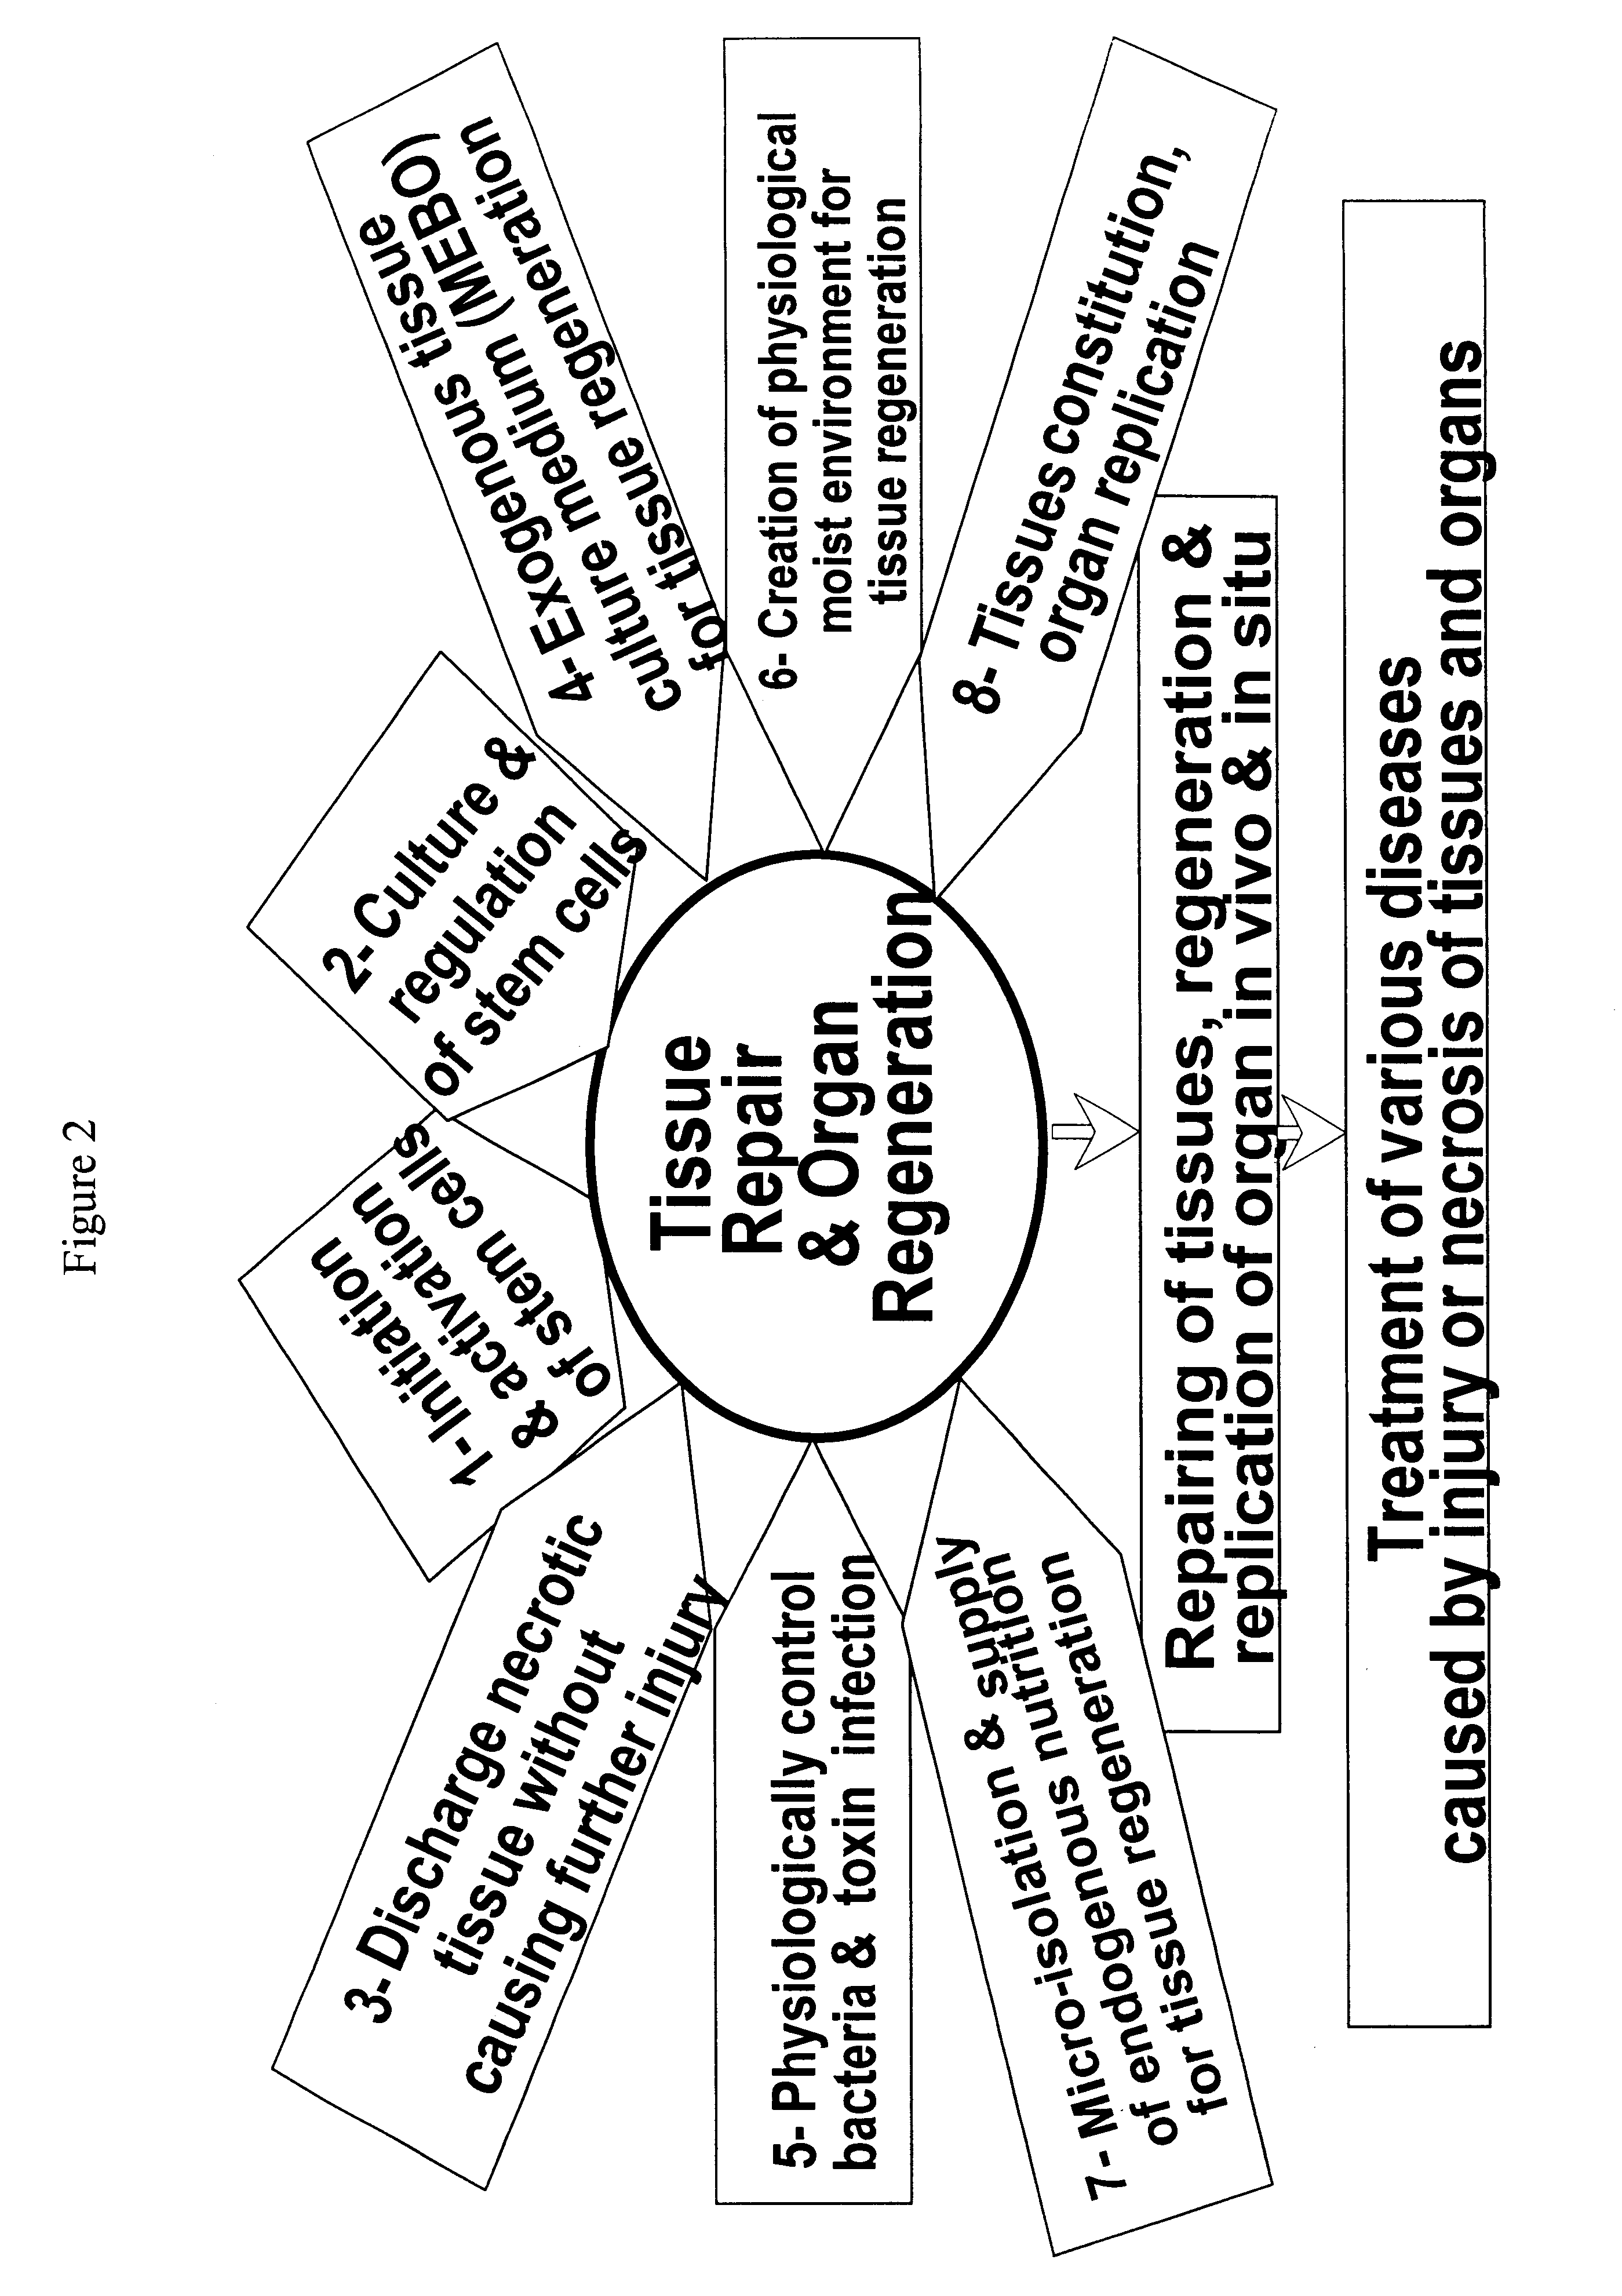 Method and composition for repairing and promoting regeneration of mucosal tissue in the gastrointestinal tract